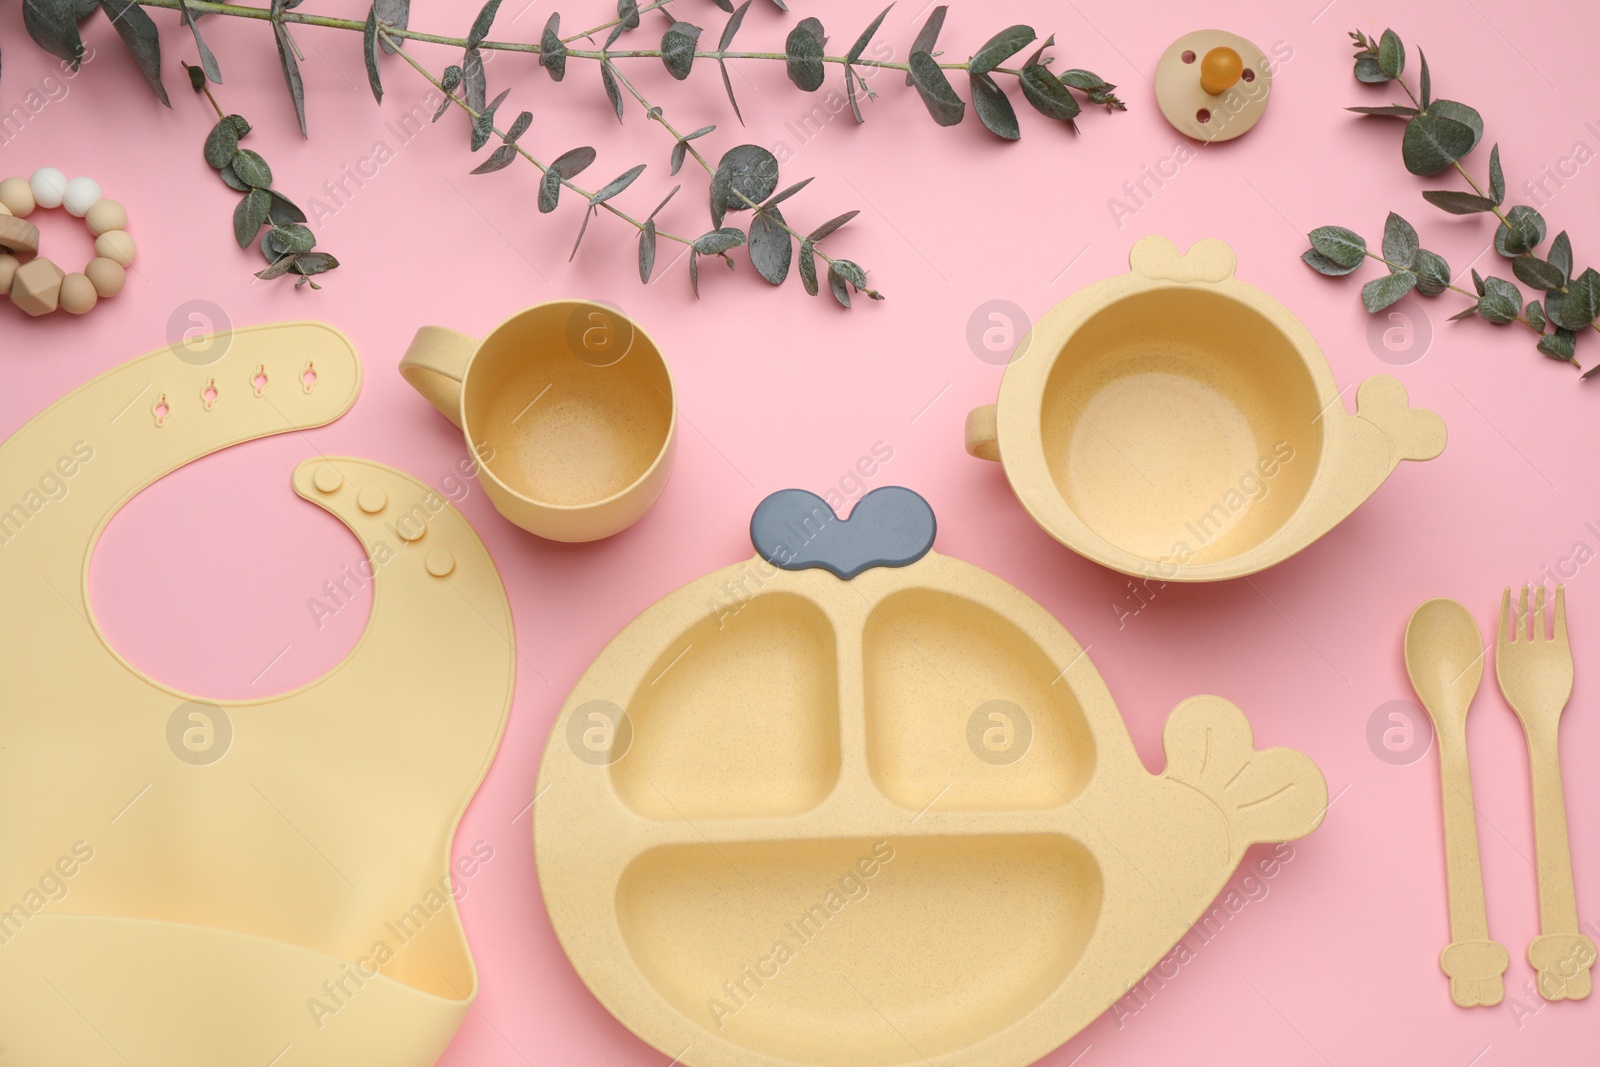 Photo of Set of plastic dishware and baby accessories on pink background, flat lay